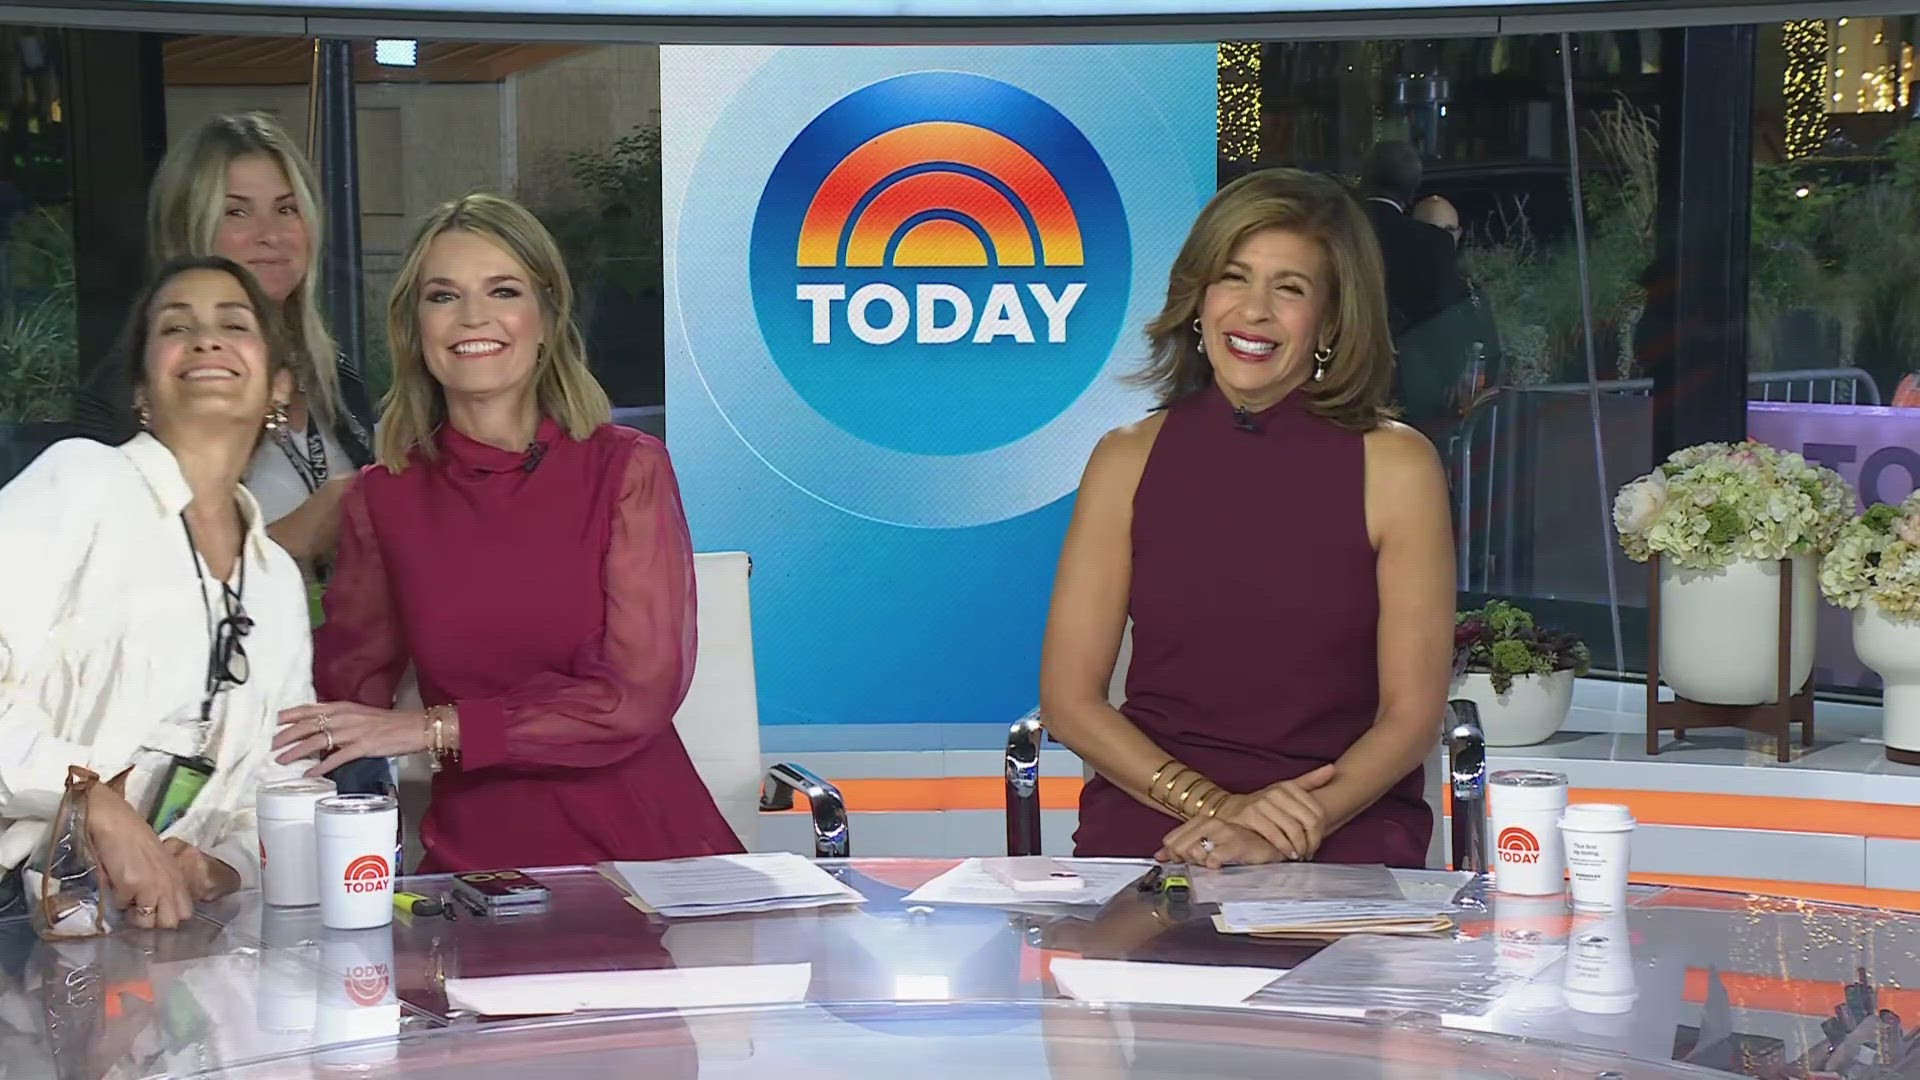 Here's a special peek behind-the-scenes at the 'TODAY' show as Al Roker took a moment to join 3News for a peek before their show.